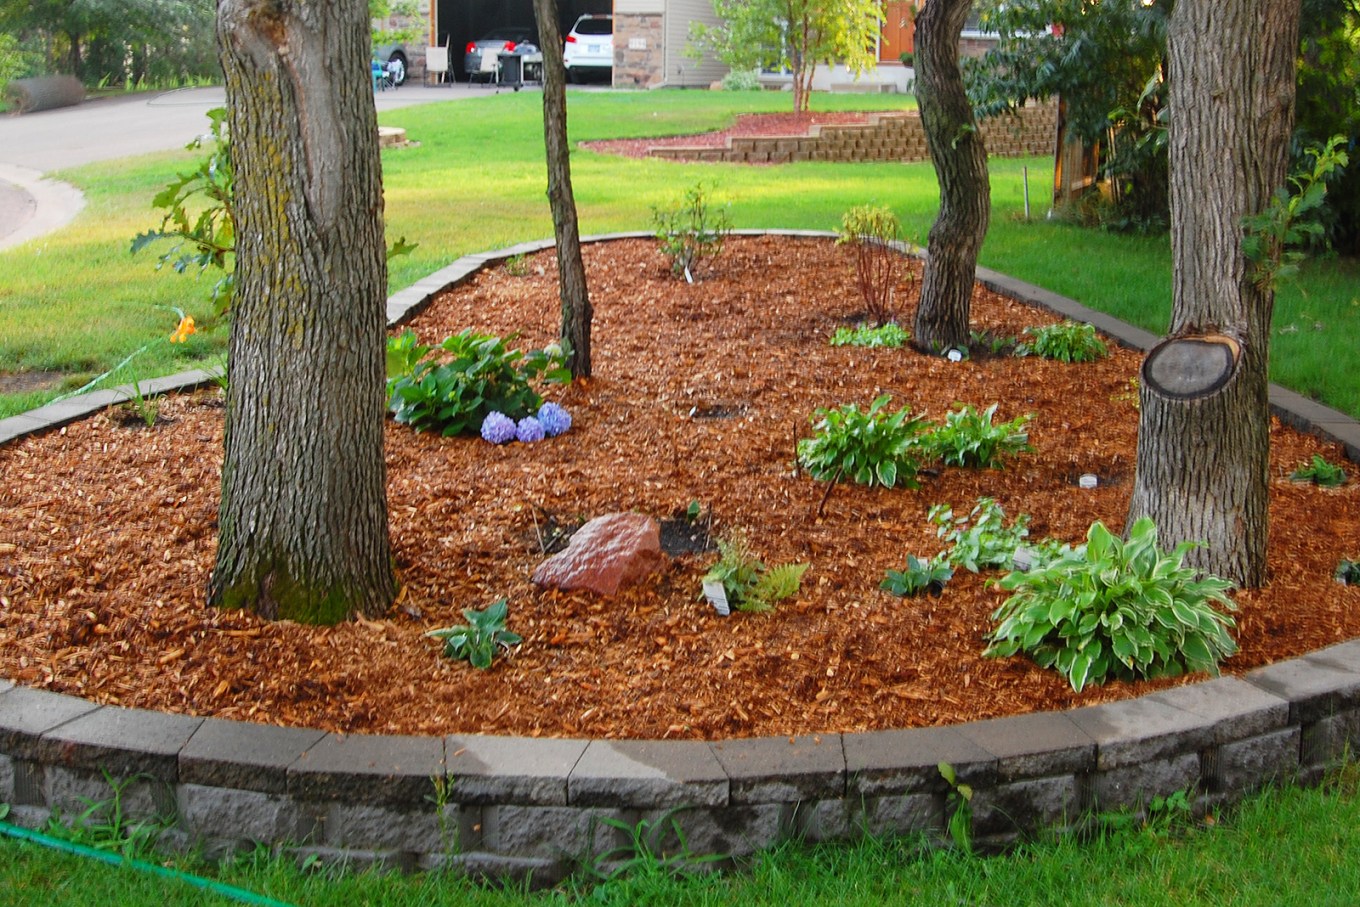 A raised mulched bed in grass